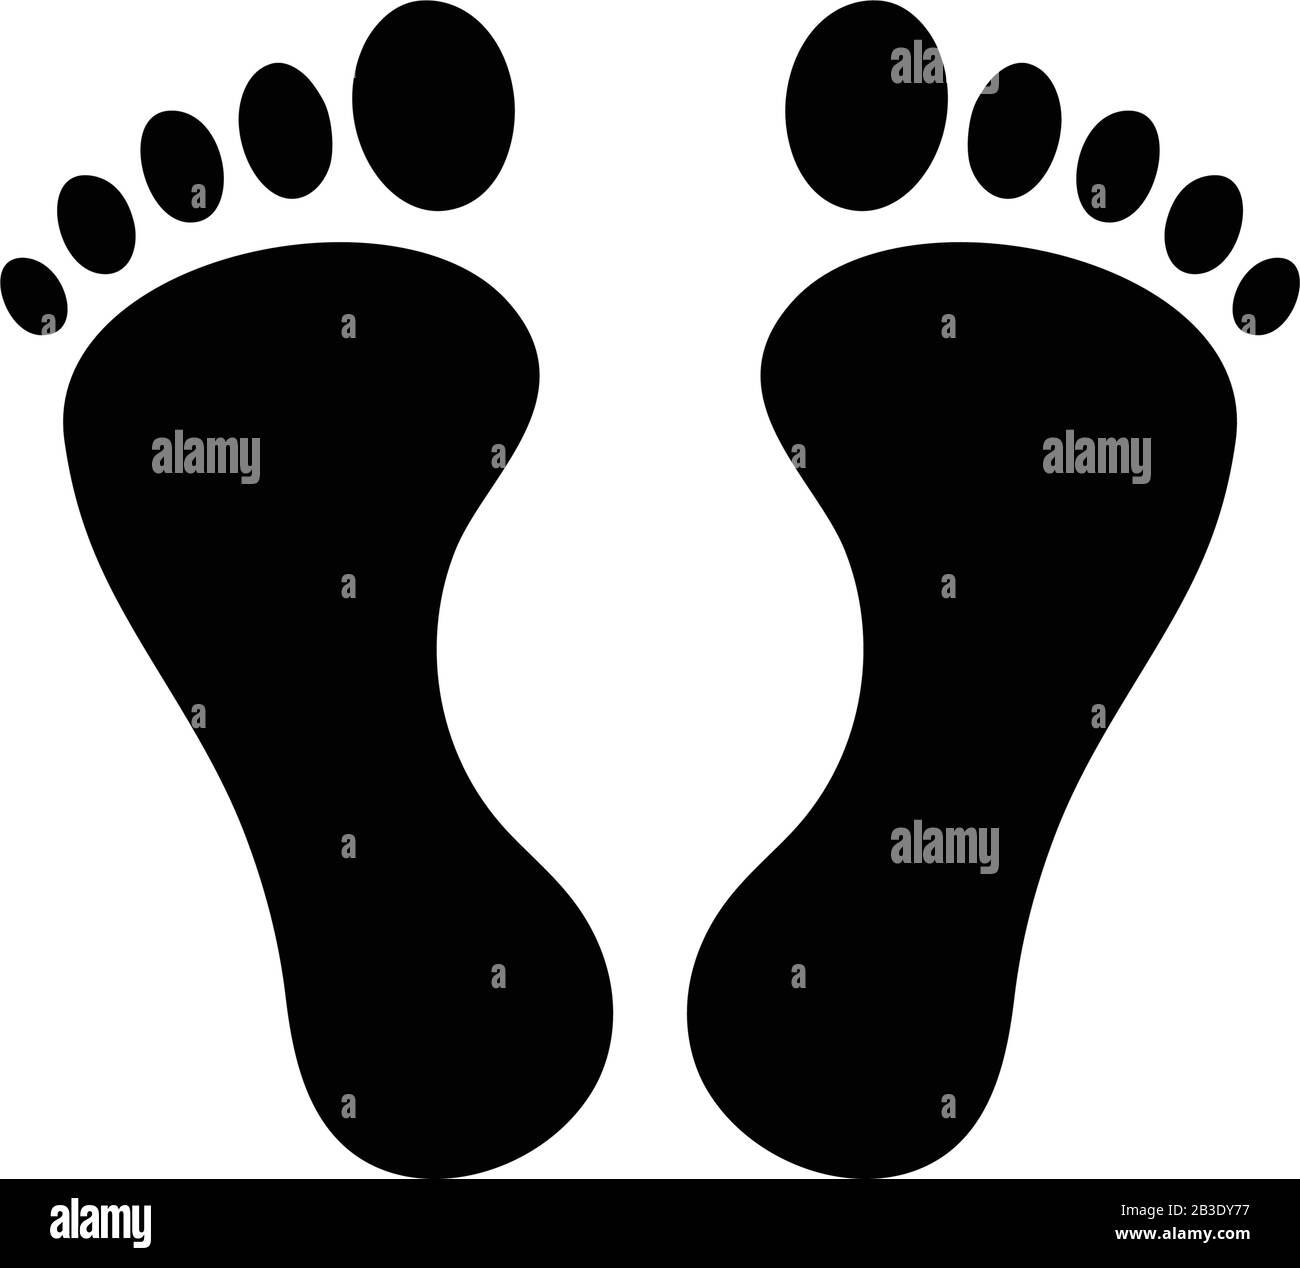 footprints vector icon template black color editable. footprints vector icon symbol Flat vector illustration for graphic and web design. Stock Vector